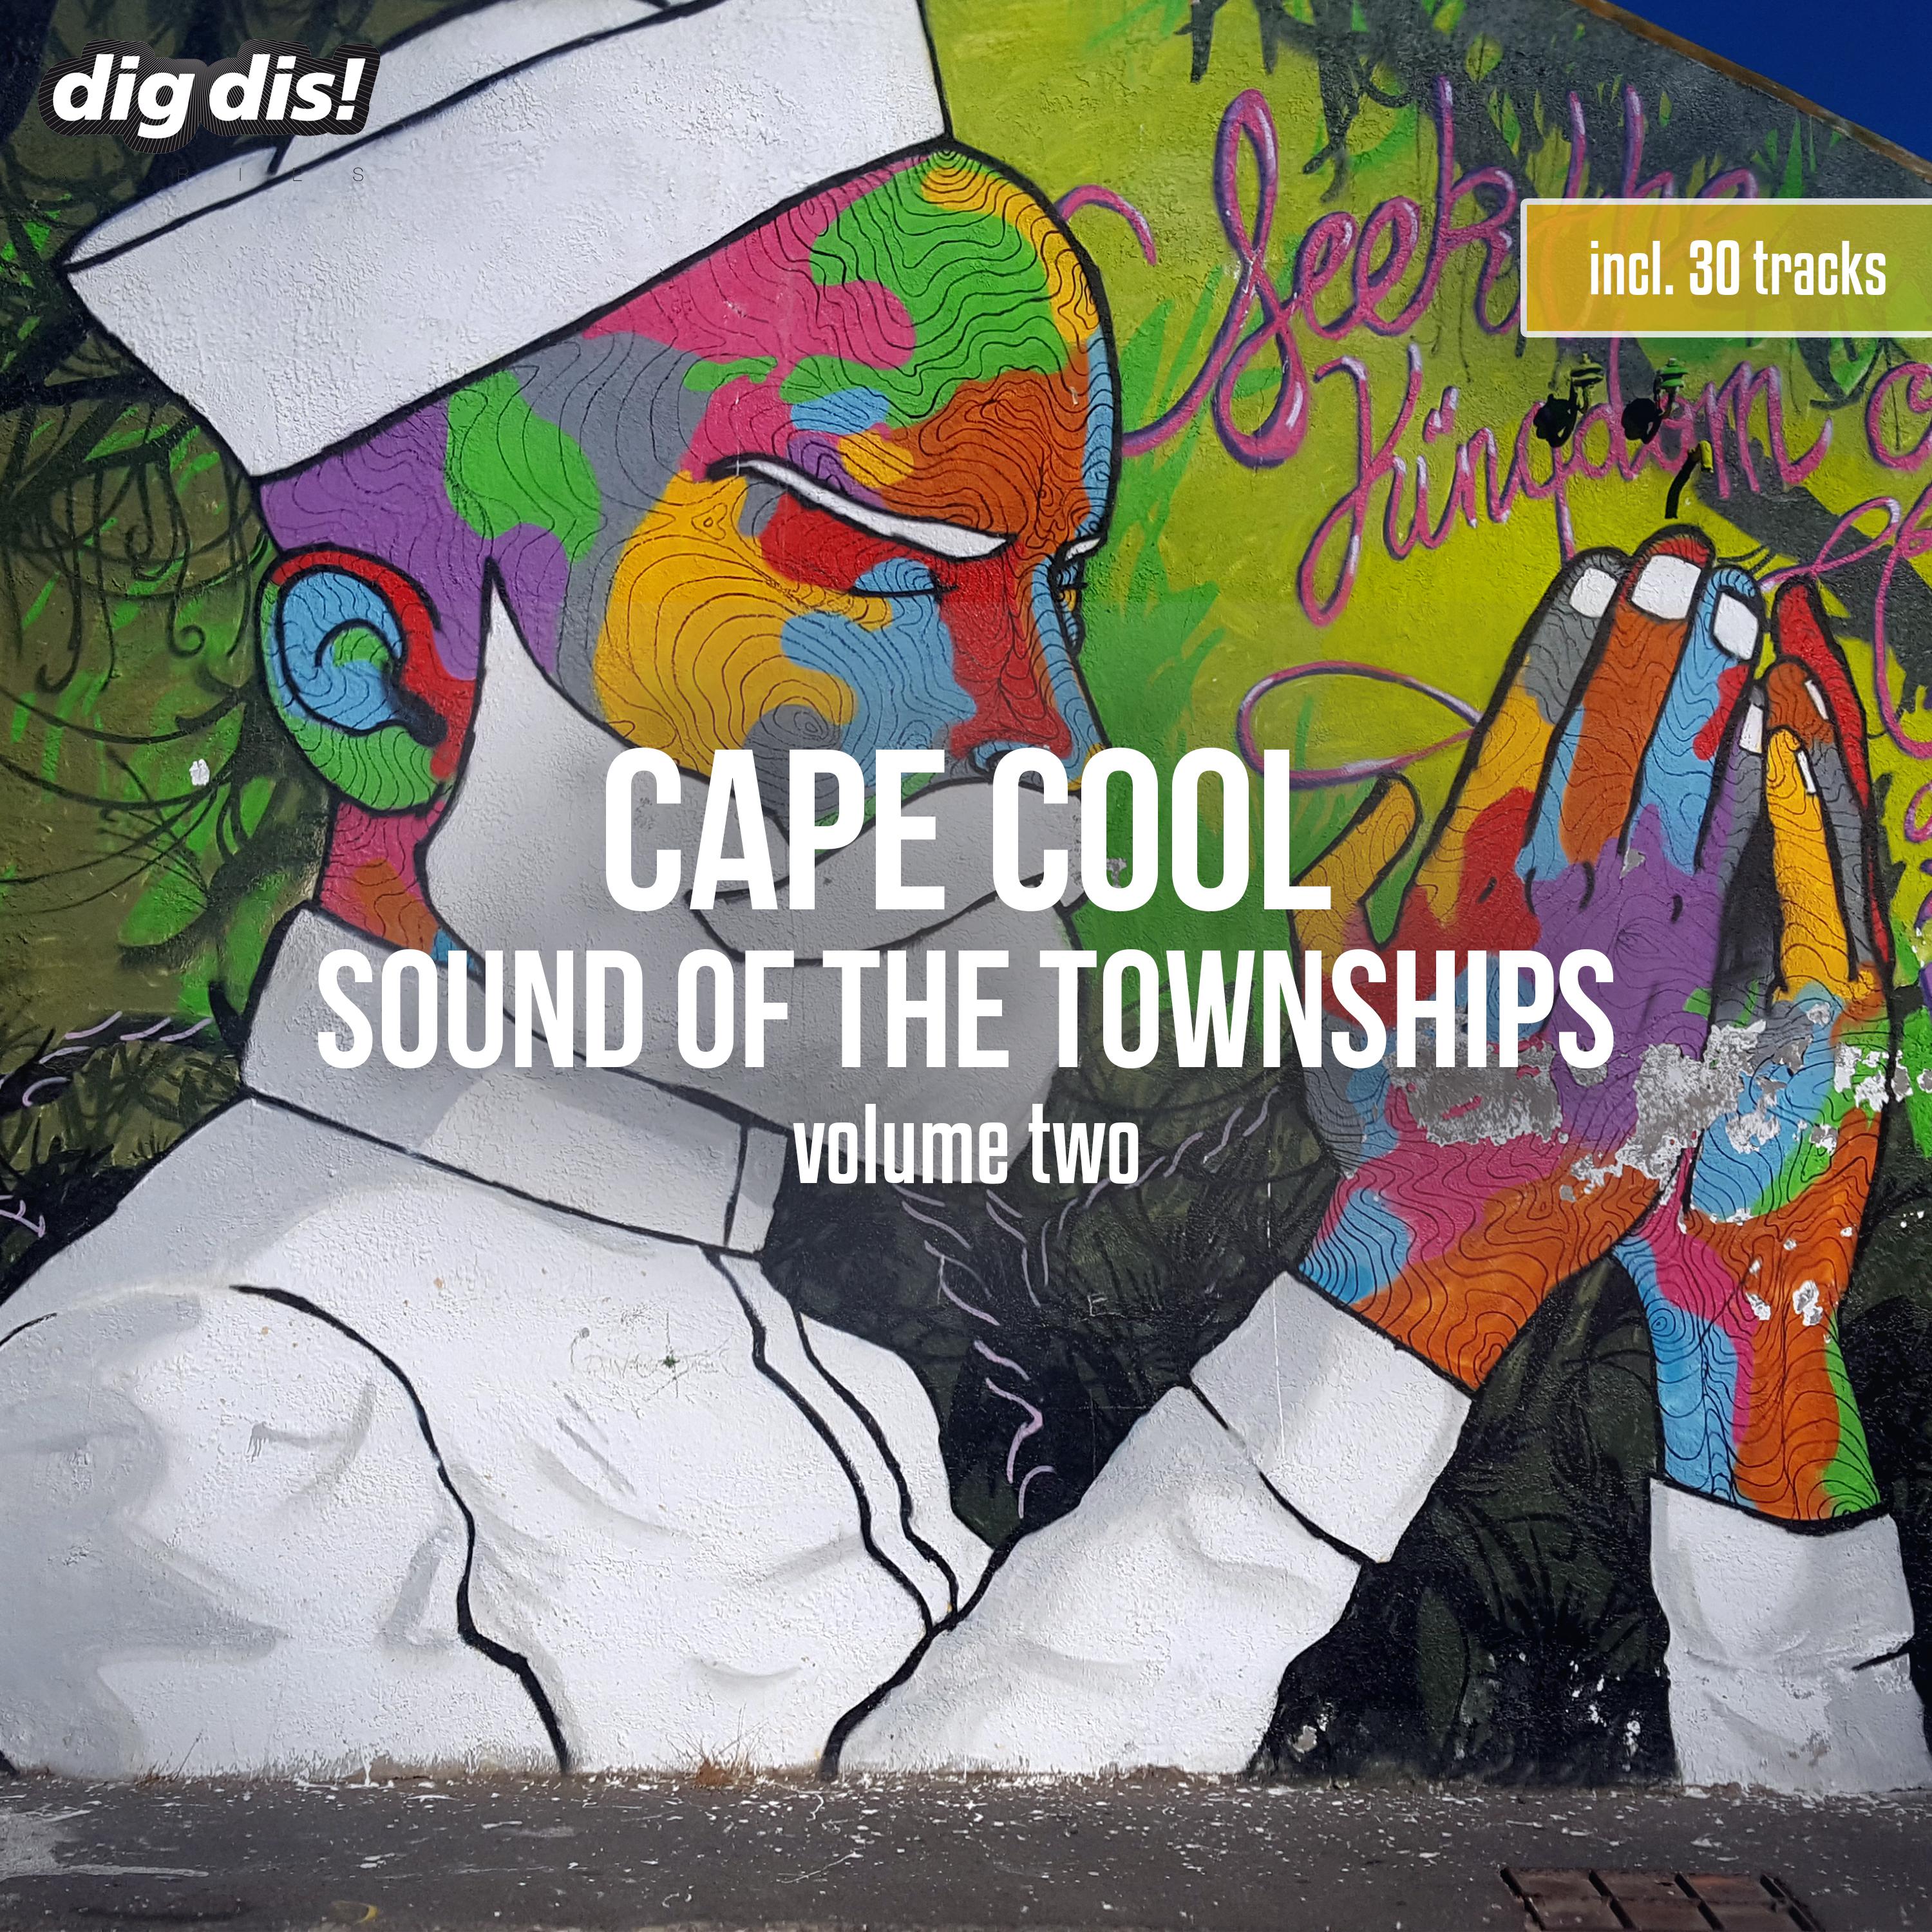 Cape Cool, Vol. 2 - Sound of the Townships